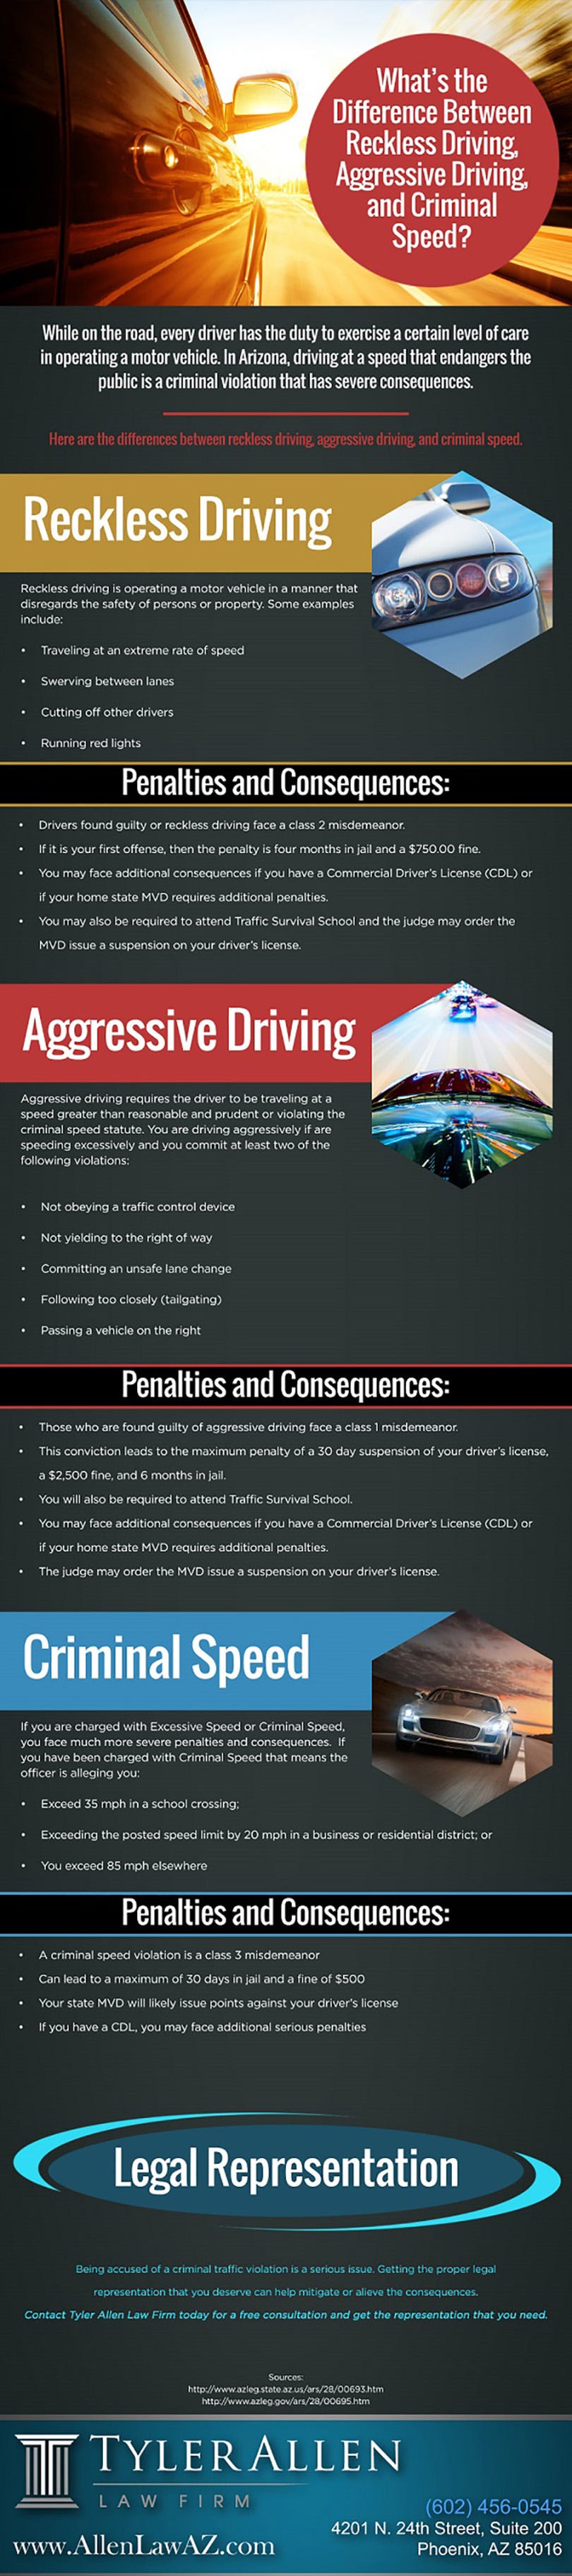 Reckless Driving Arizona: Legal Consequences